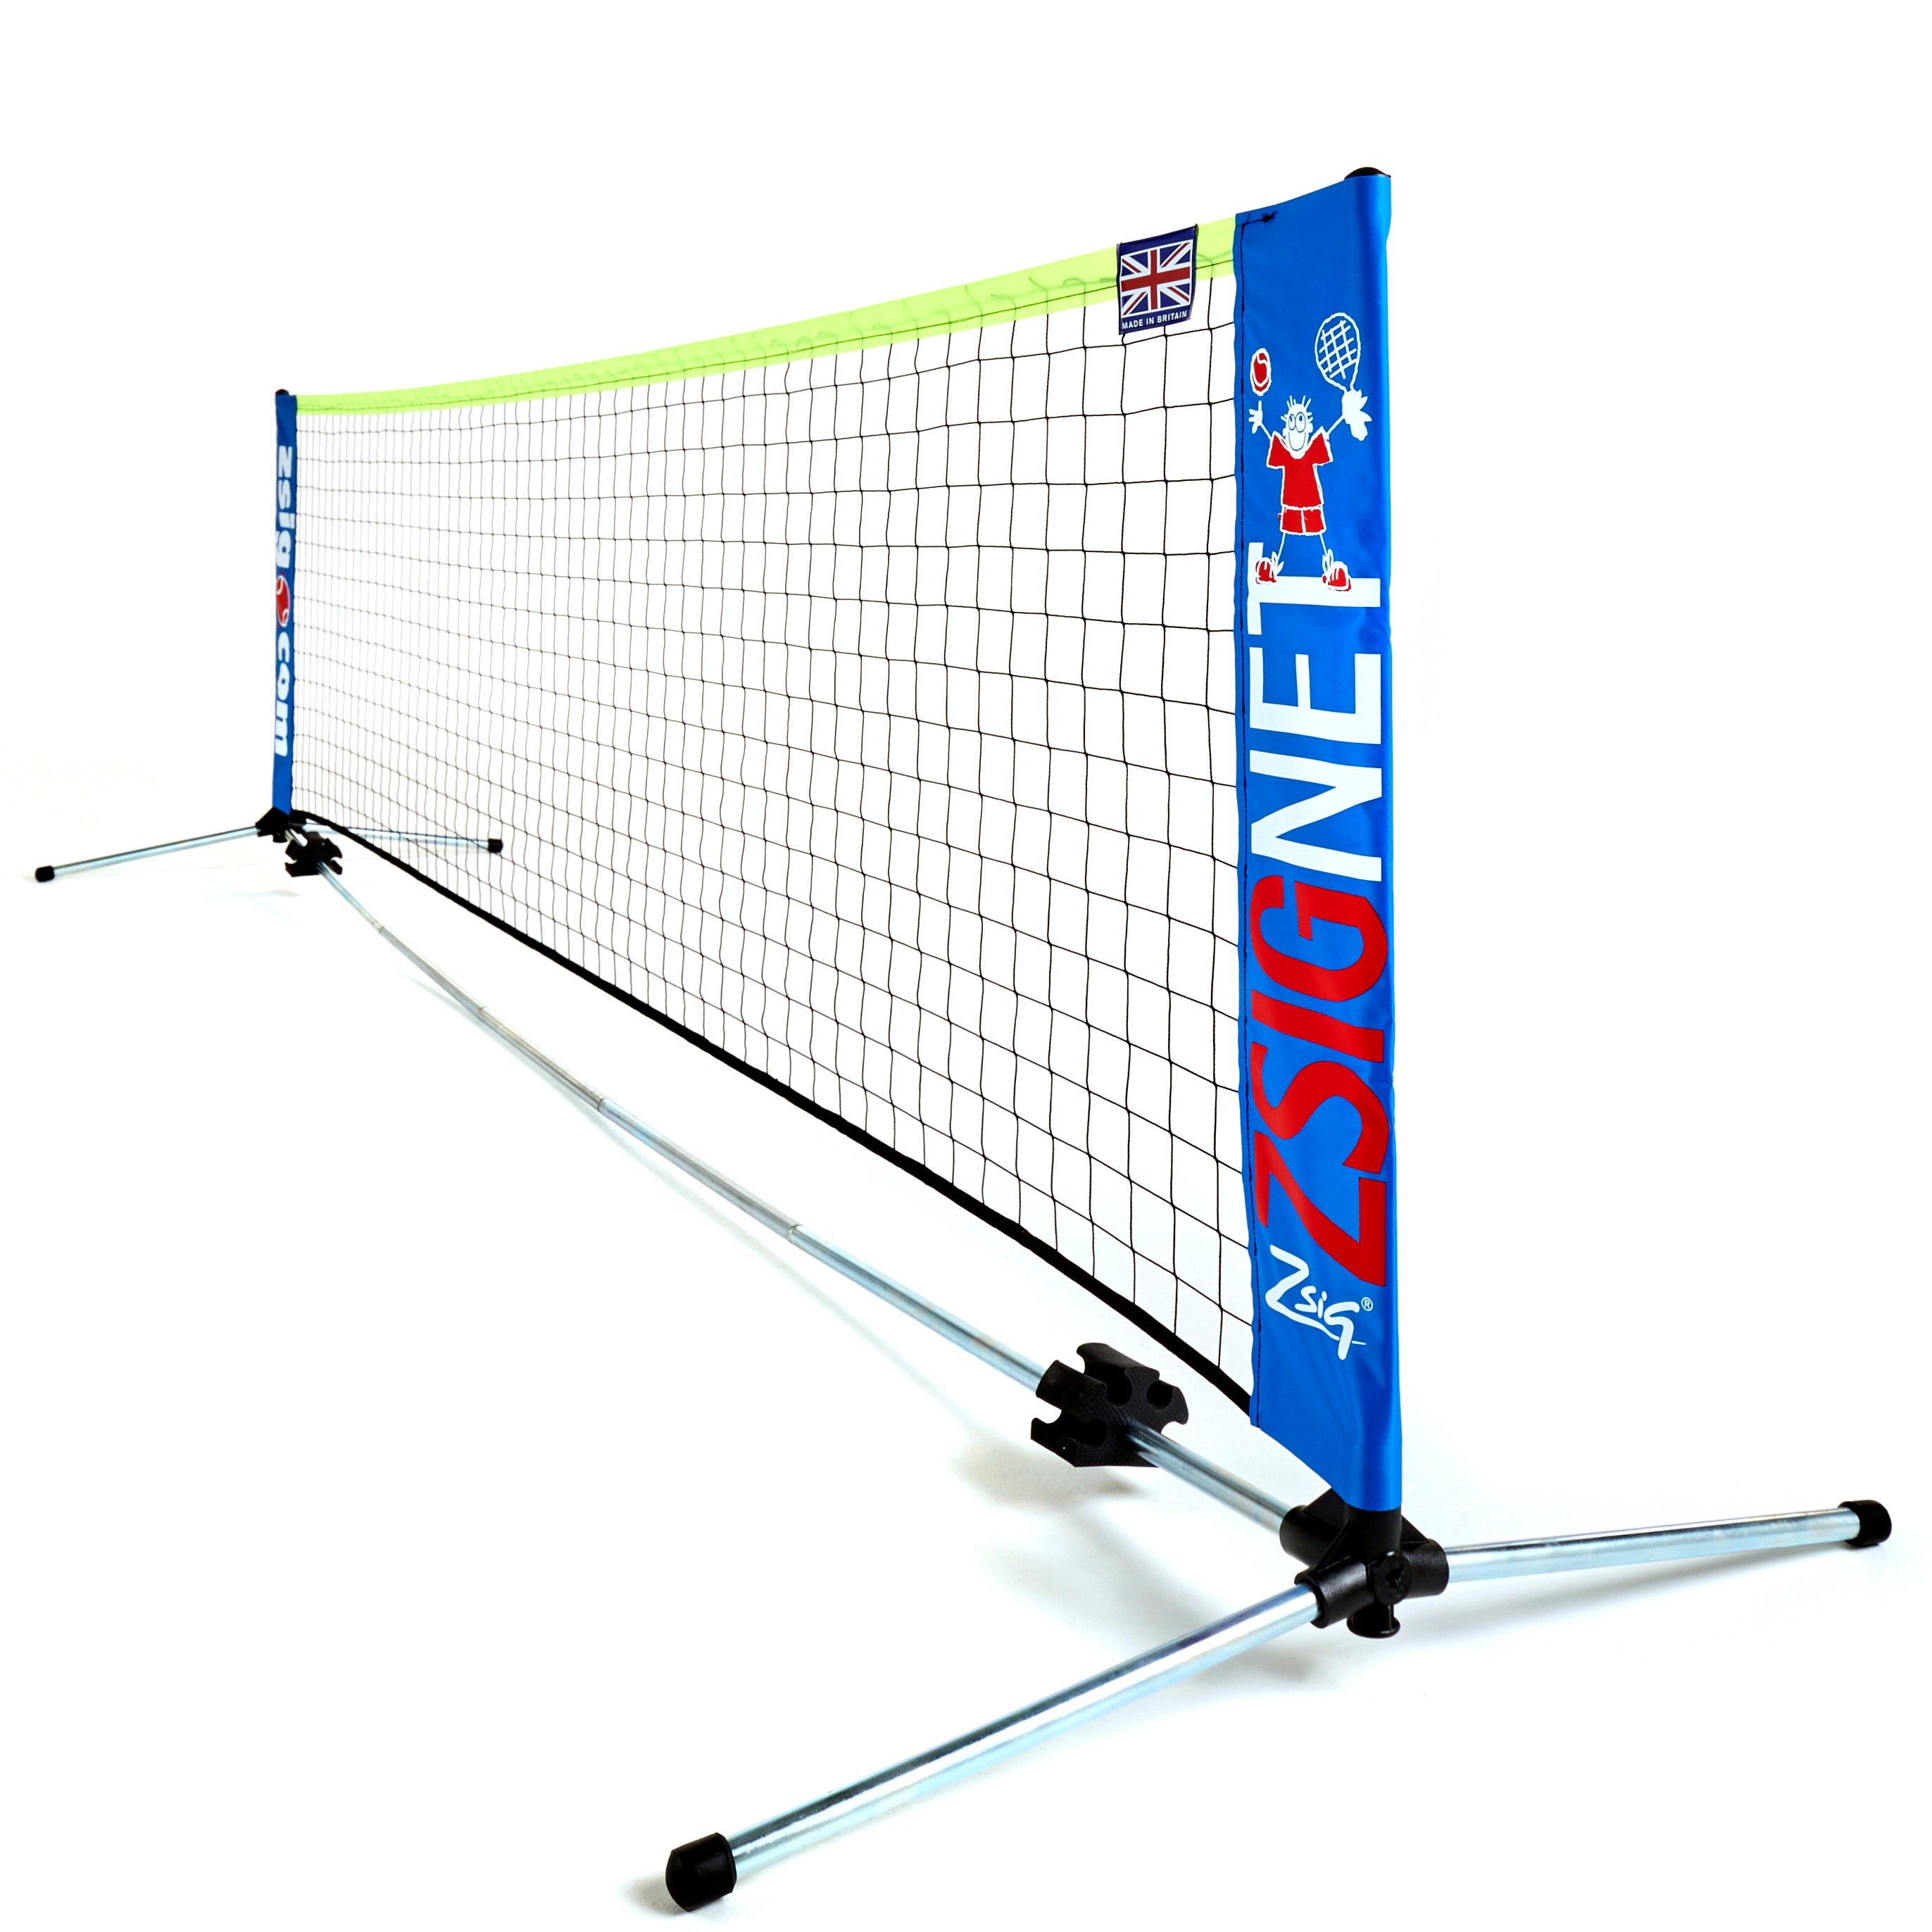 Zsig 3m Mini Tennis Net - great for gardens, or taking to the park or beach!